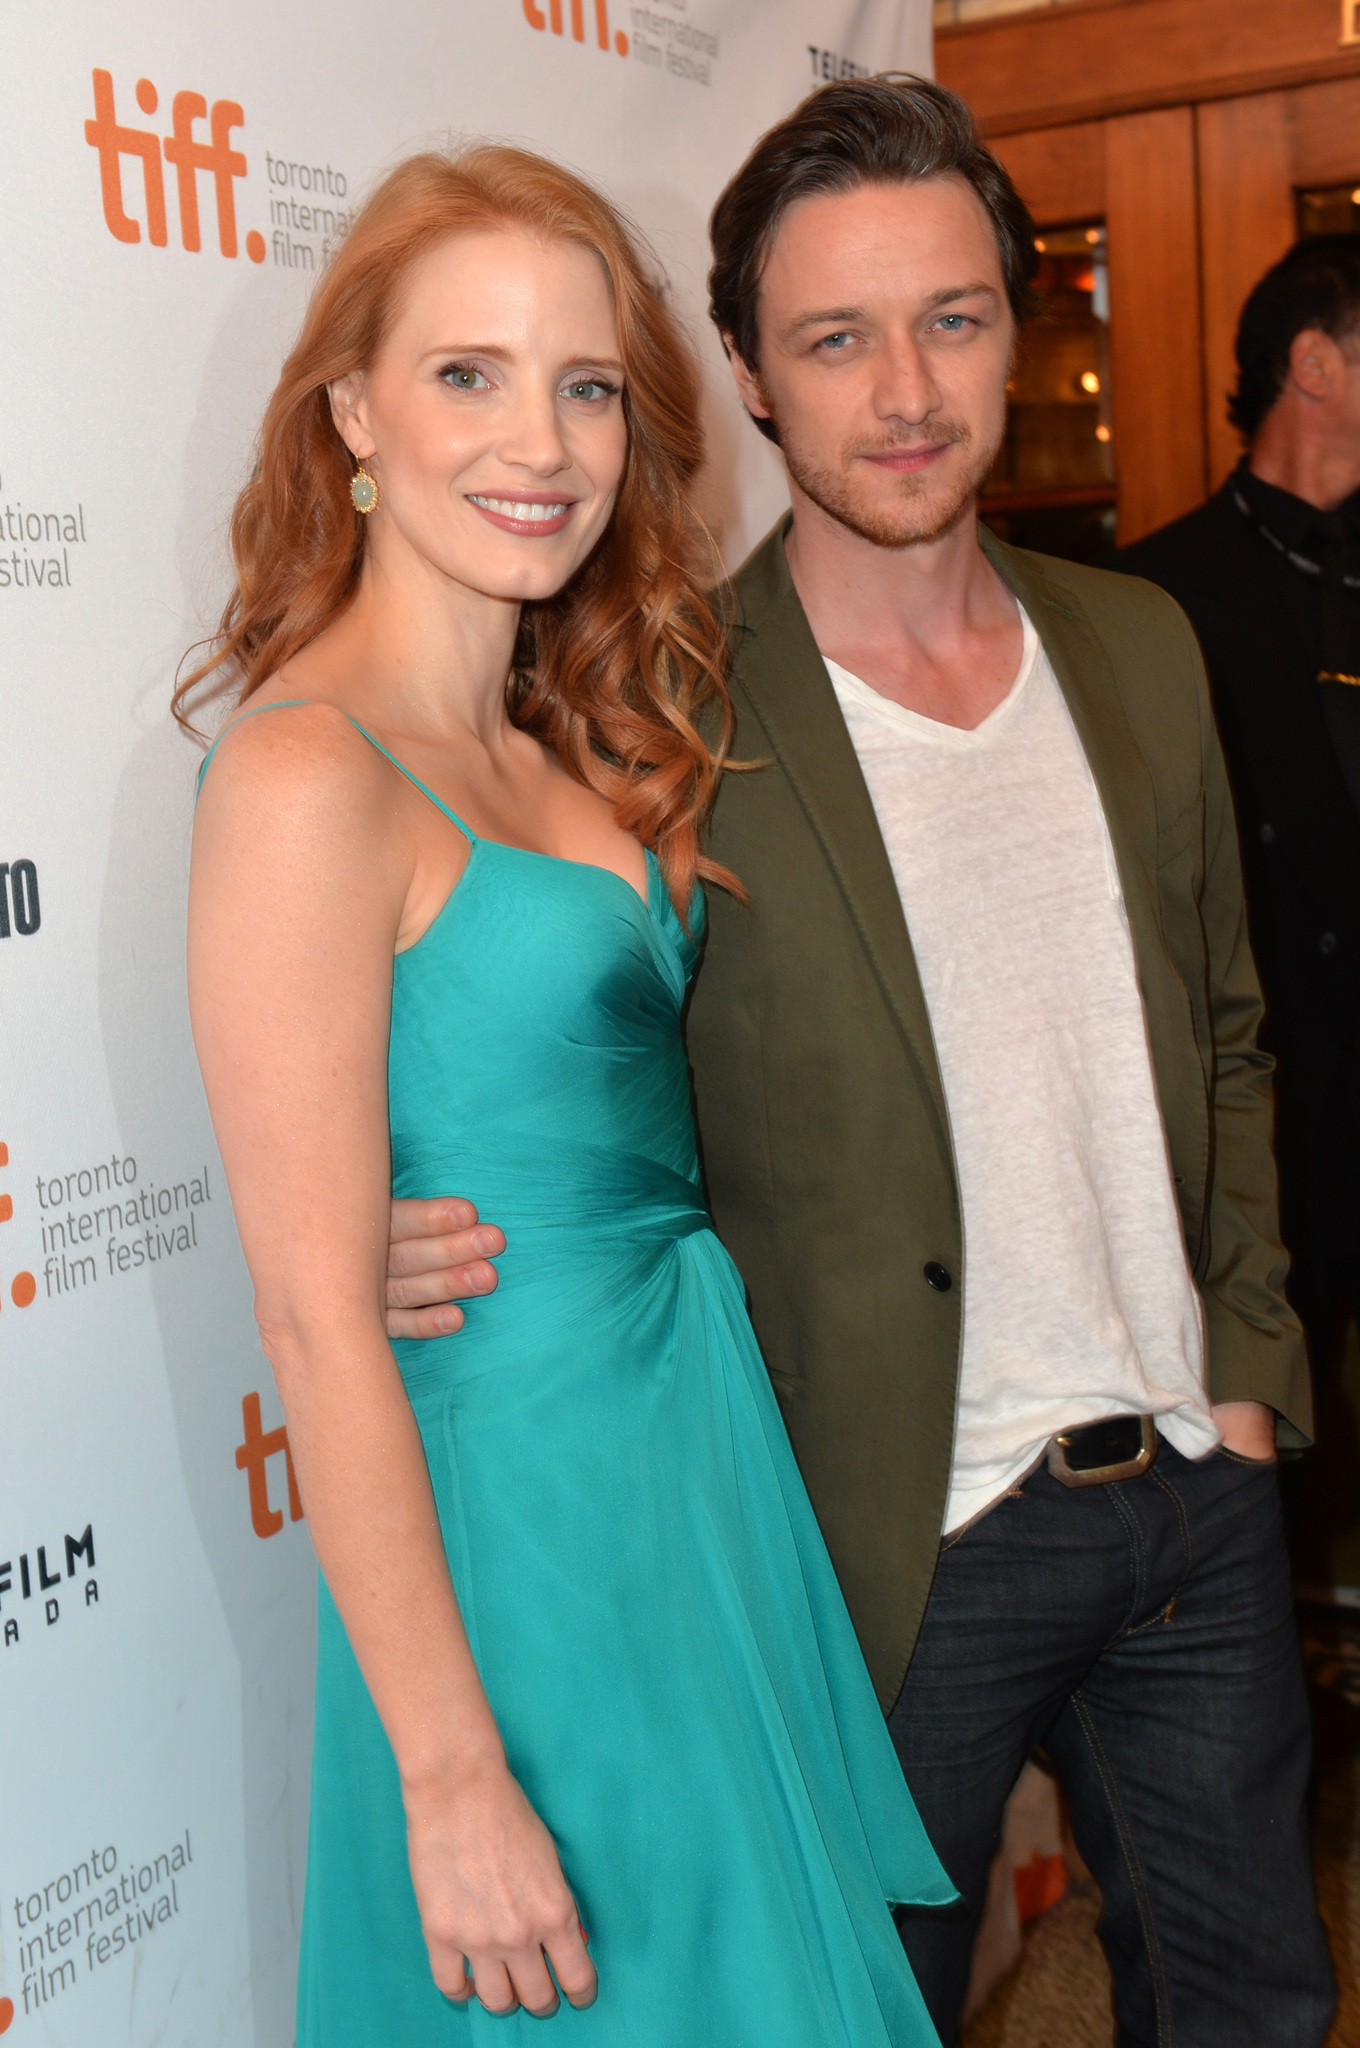 James McAvoy and Jessica Chastain at event of The Disappearance of Eleanor Rigby: Him (2013)